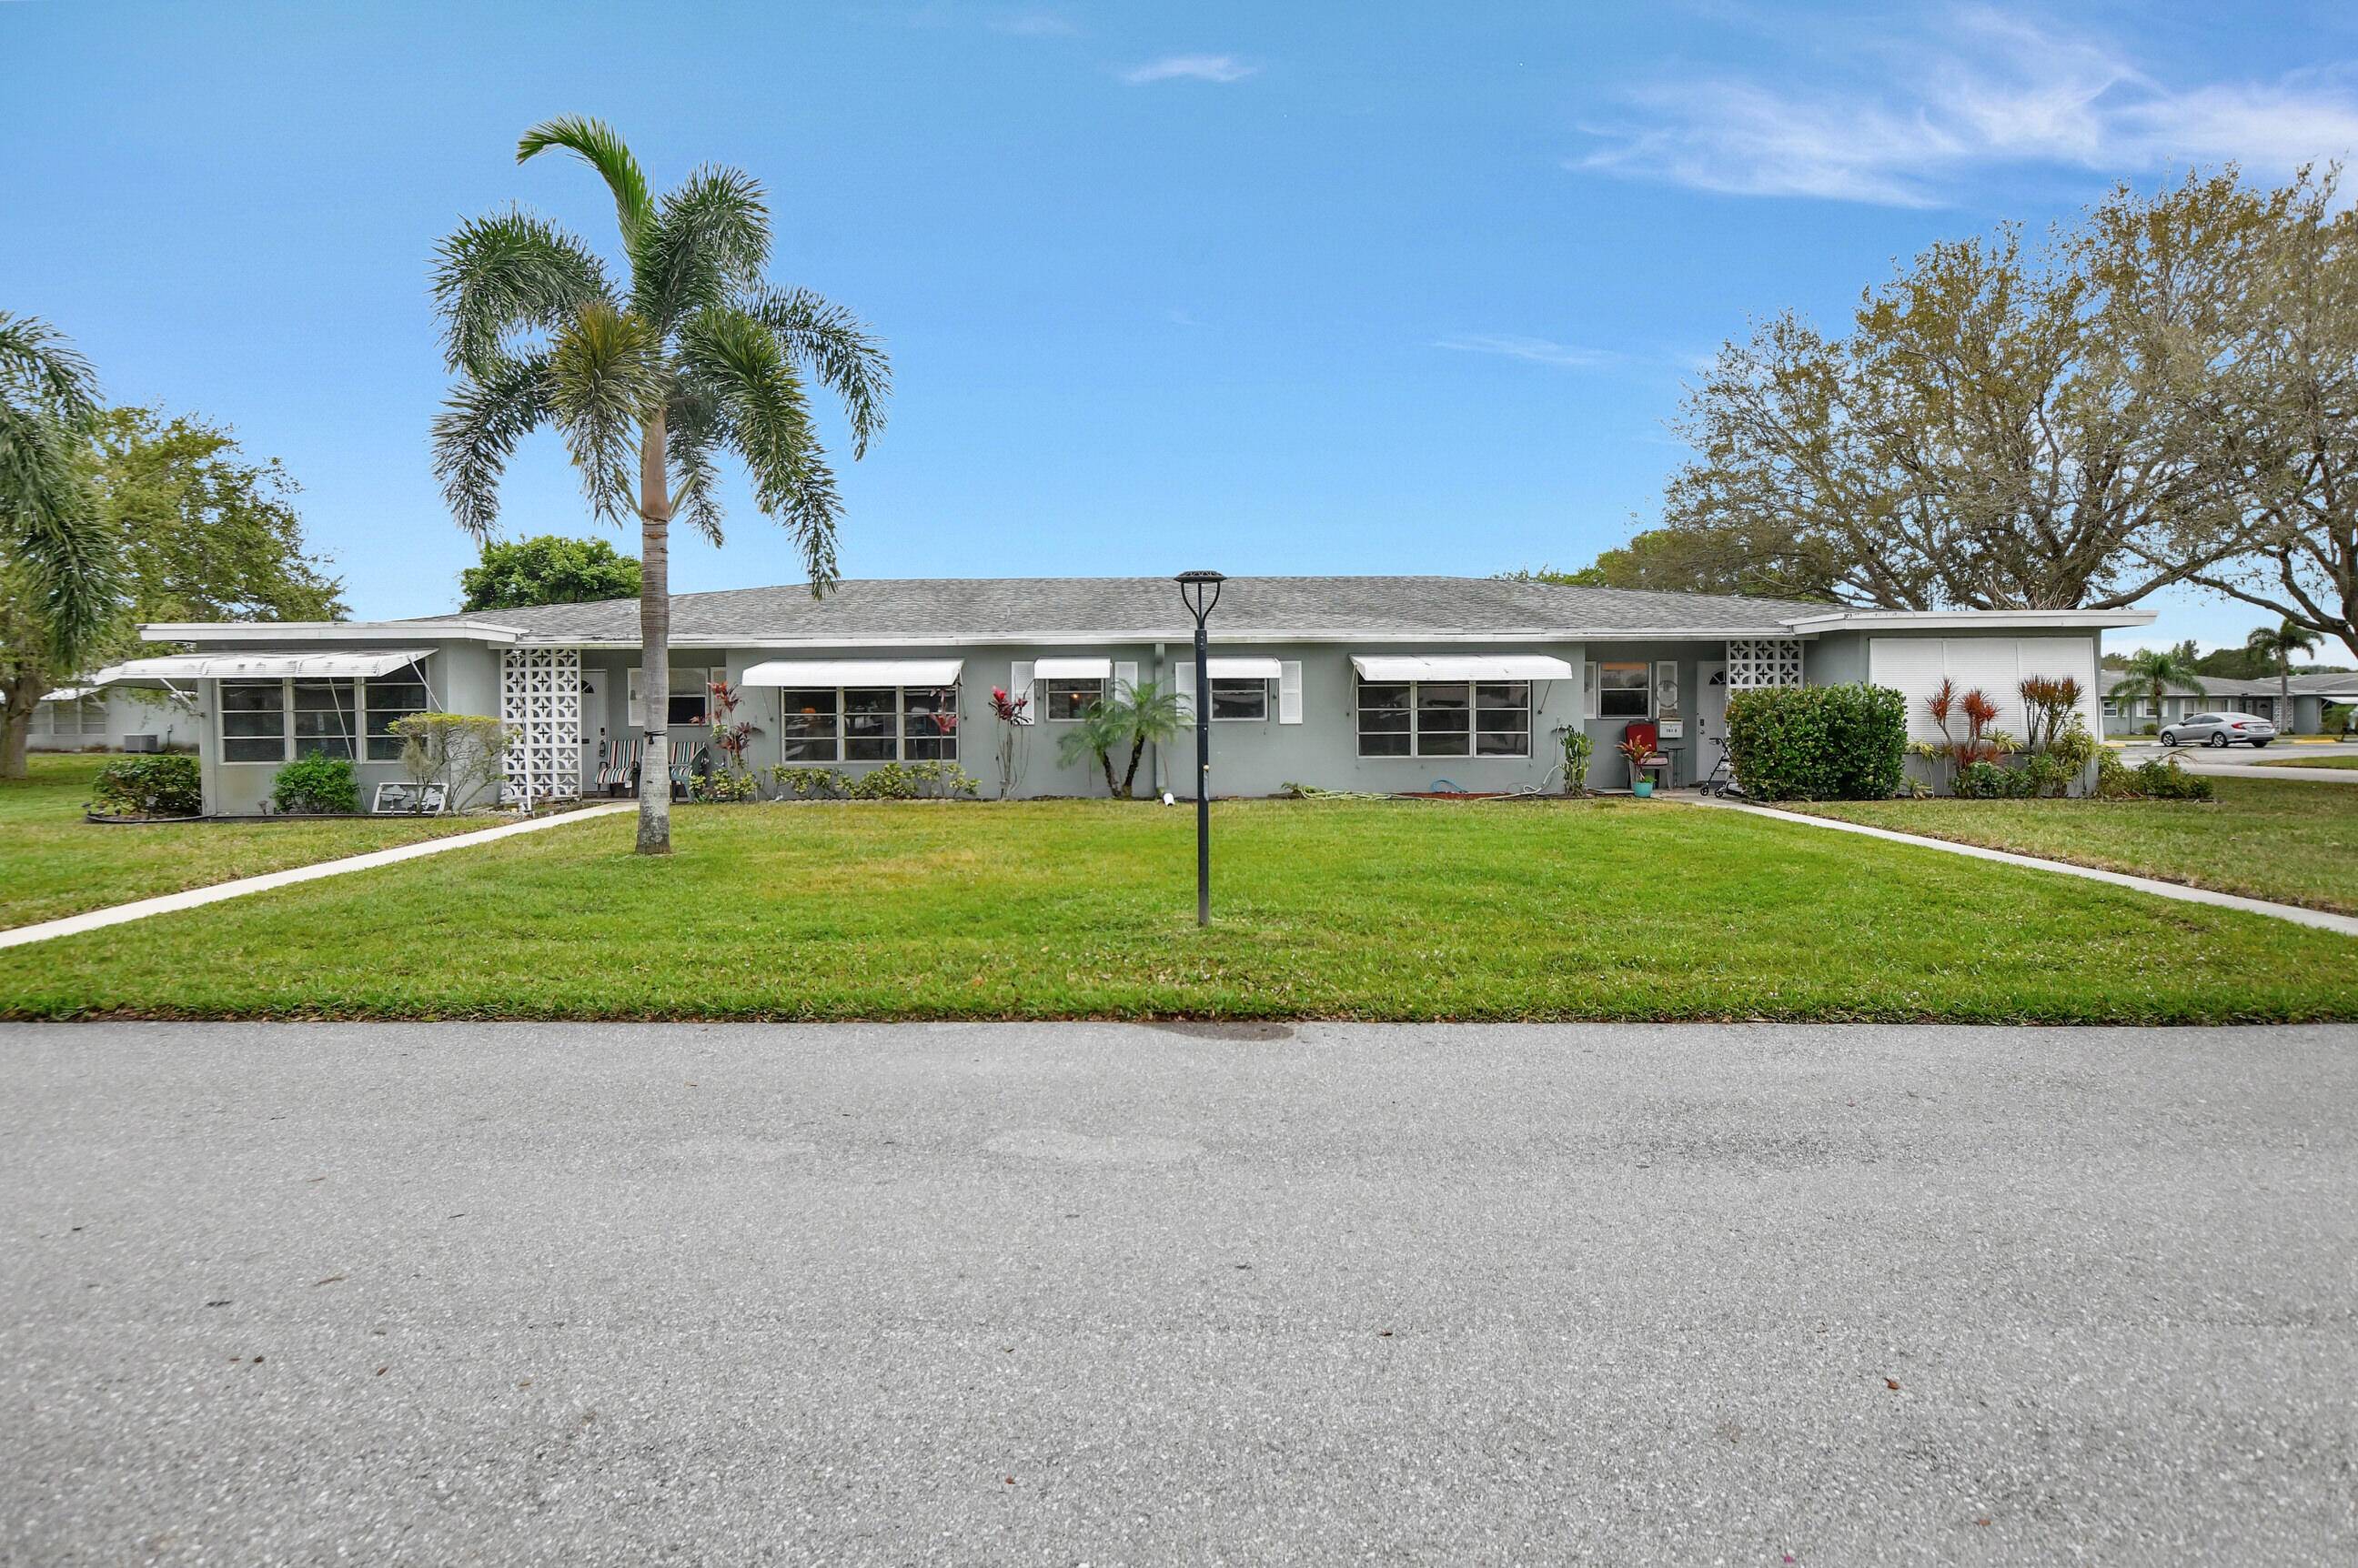 This 2BR 2BA corner villa is located in the 55 community of High Point of Delray Beach.